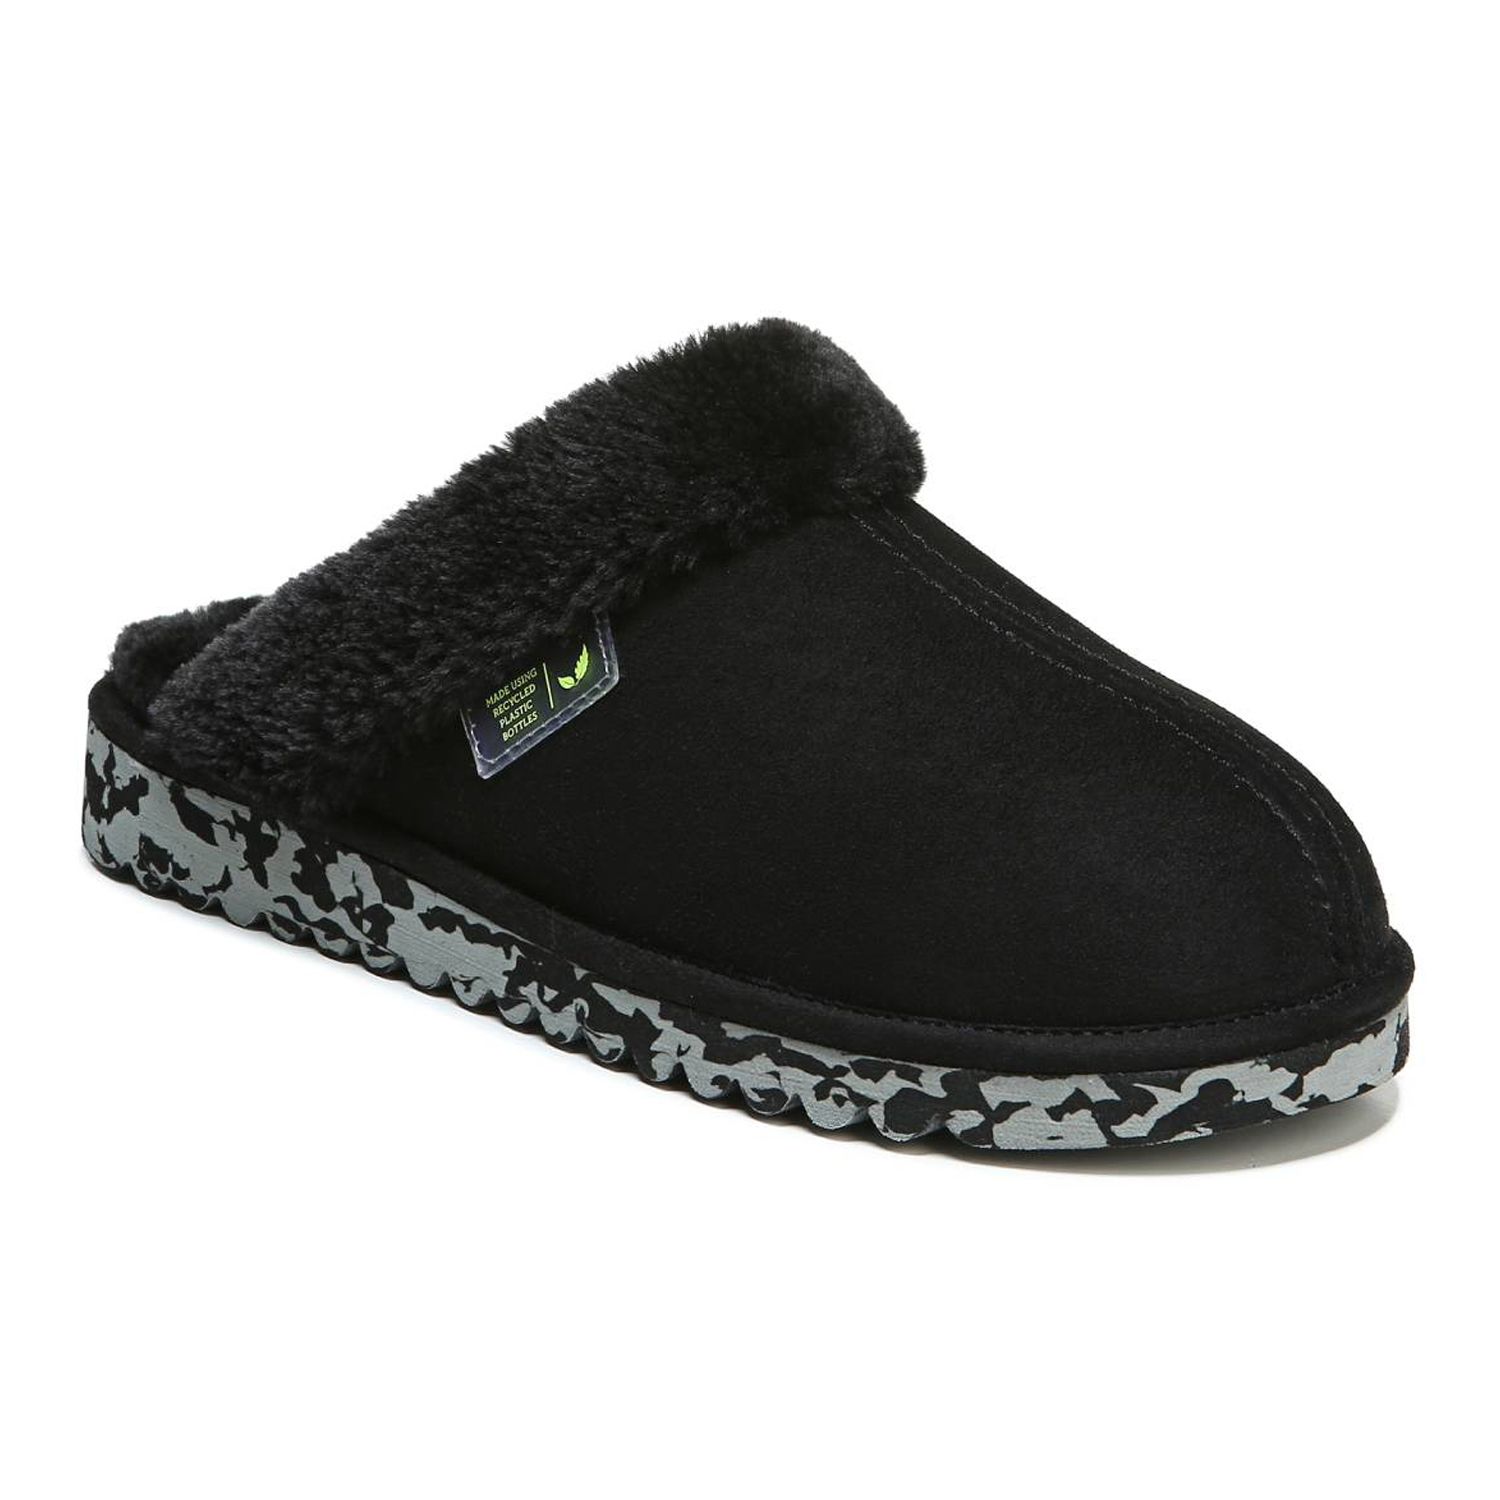 Image for Dr. Scholl's Staycay Fluff Women's Slippers at Kohl's.